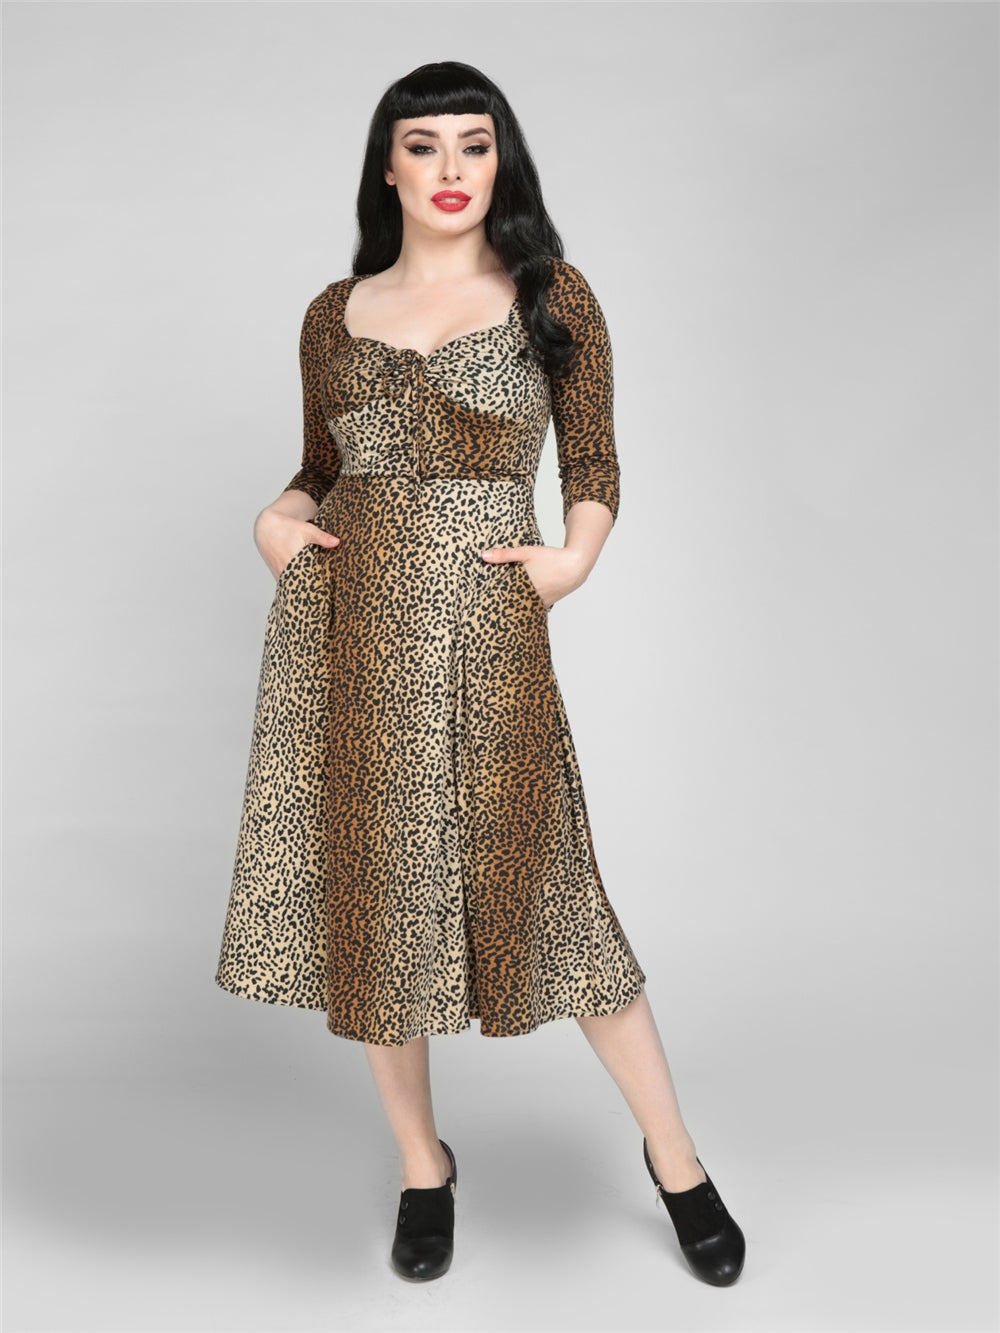 Collectif Minda Leopard Swing Dress animal print retro vintage 40s 50s pinup pin-up dress Suzie's Bombshell Boutique cheetah leopard sexy